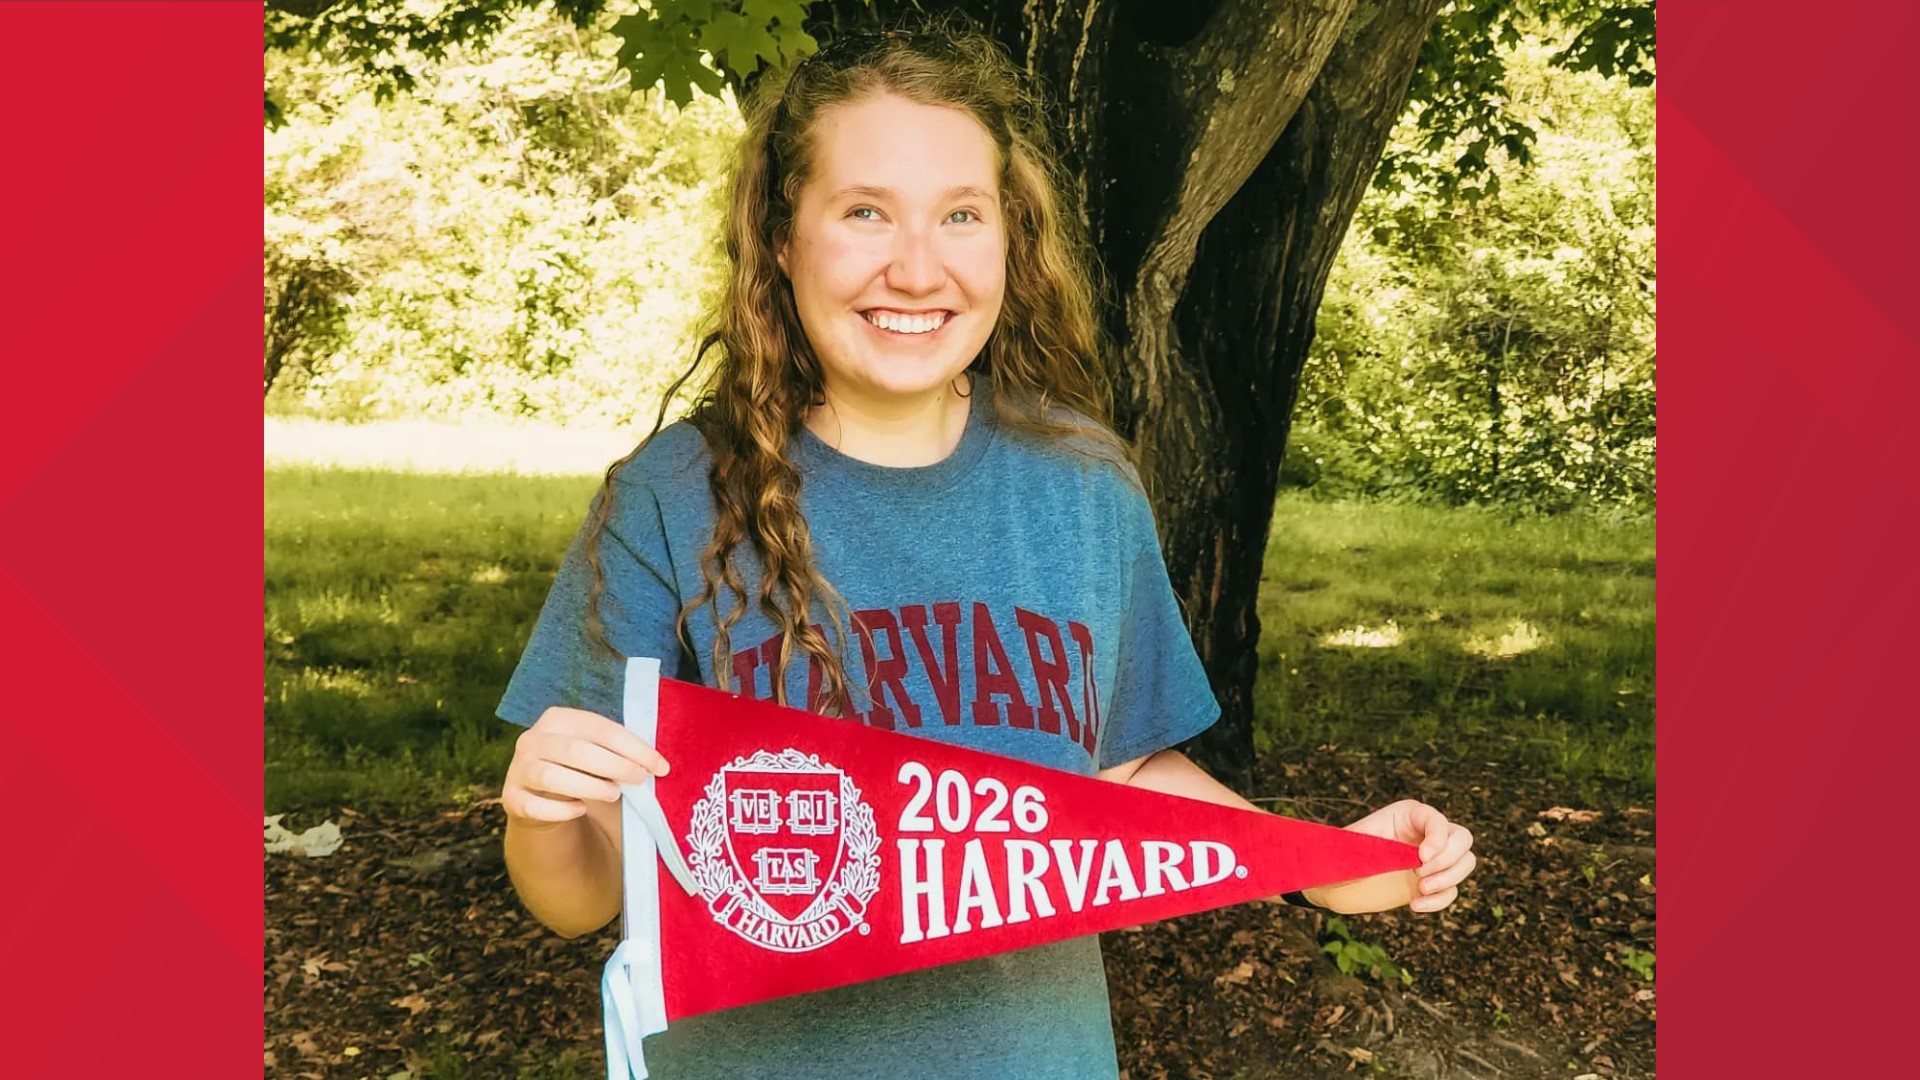 Campbell Rutherford was born with a genetic eye condition. Her interests and love of learning landed her in the Harvard Class of 2026.